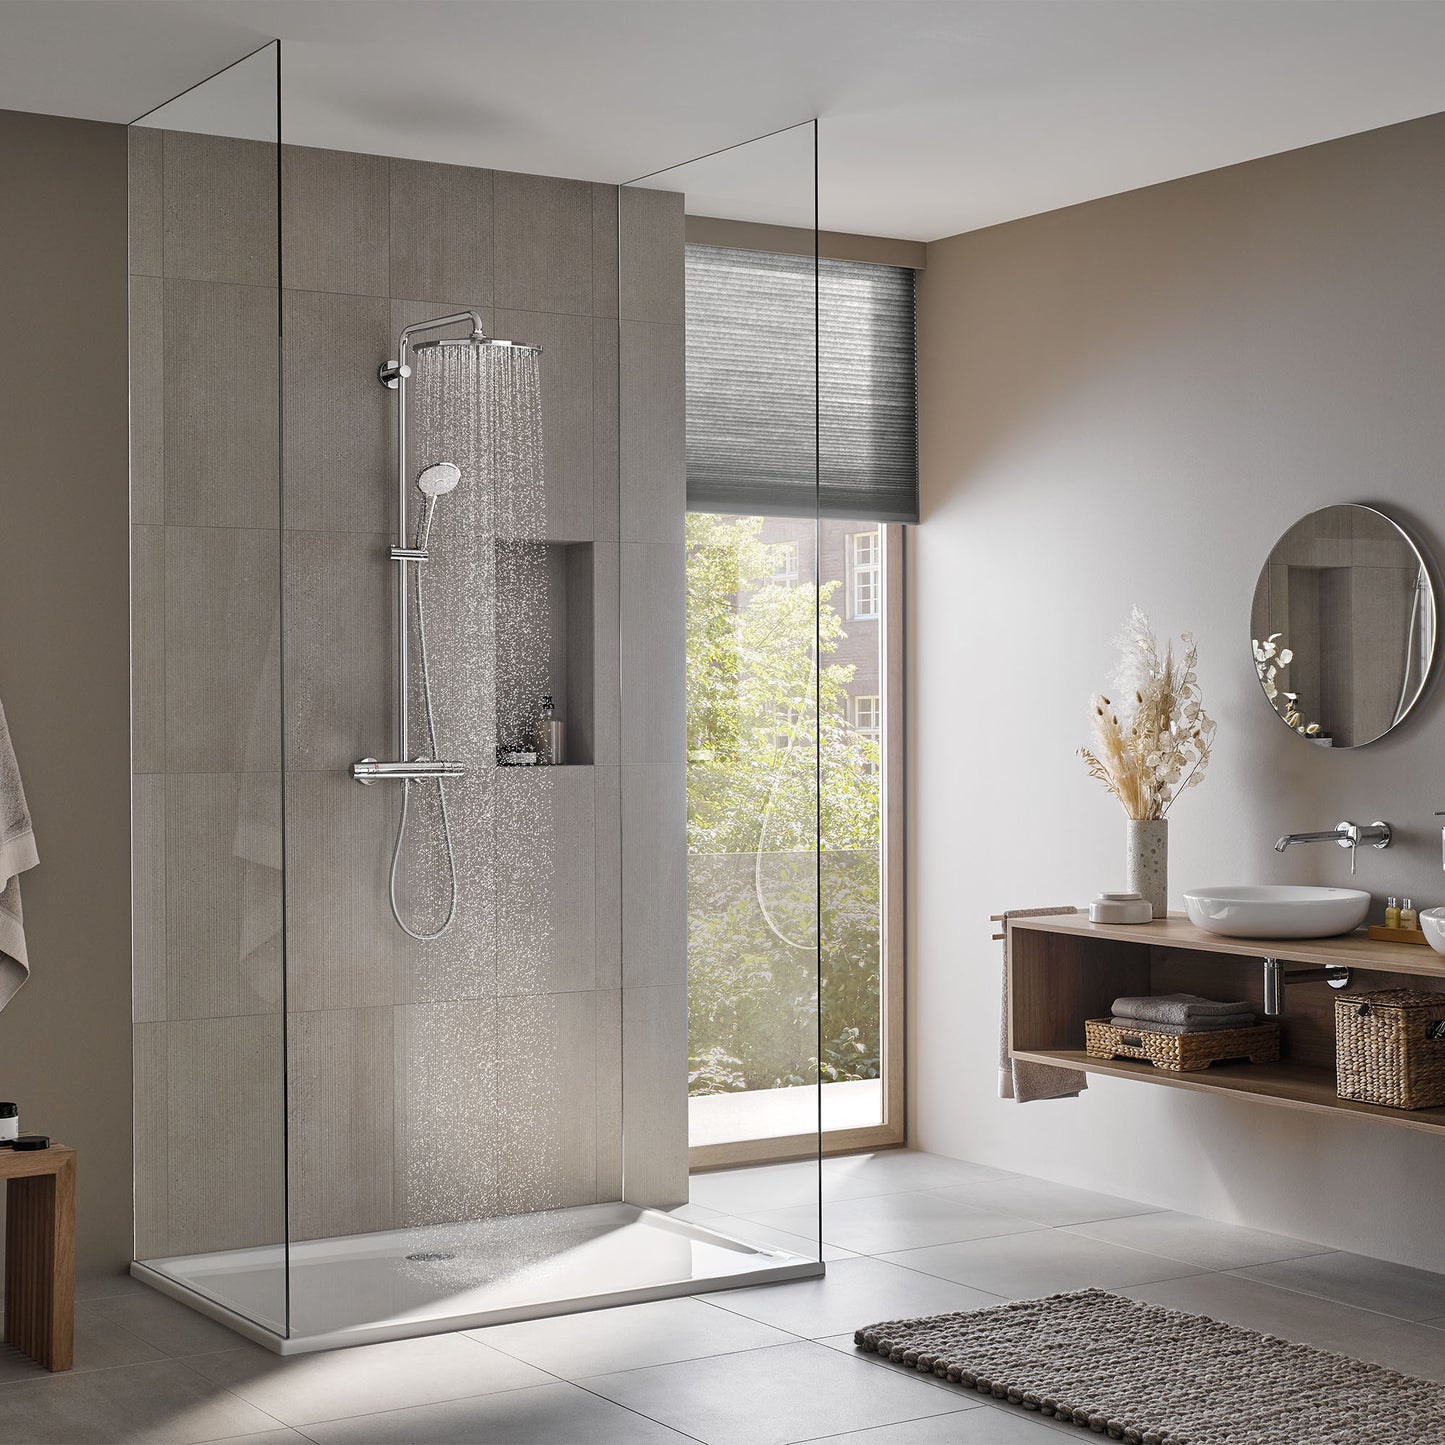 Grohe Euphoria 310 Cooltouch Thermostatic Shower System, 1.75GPM